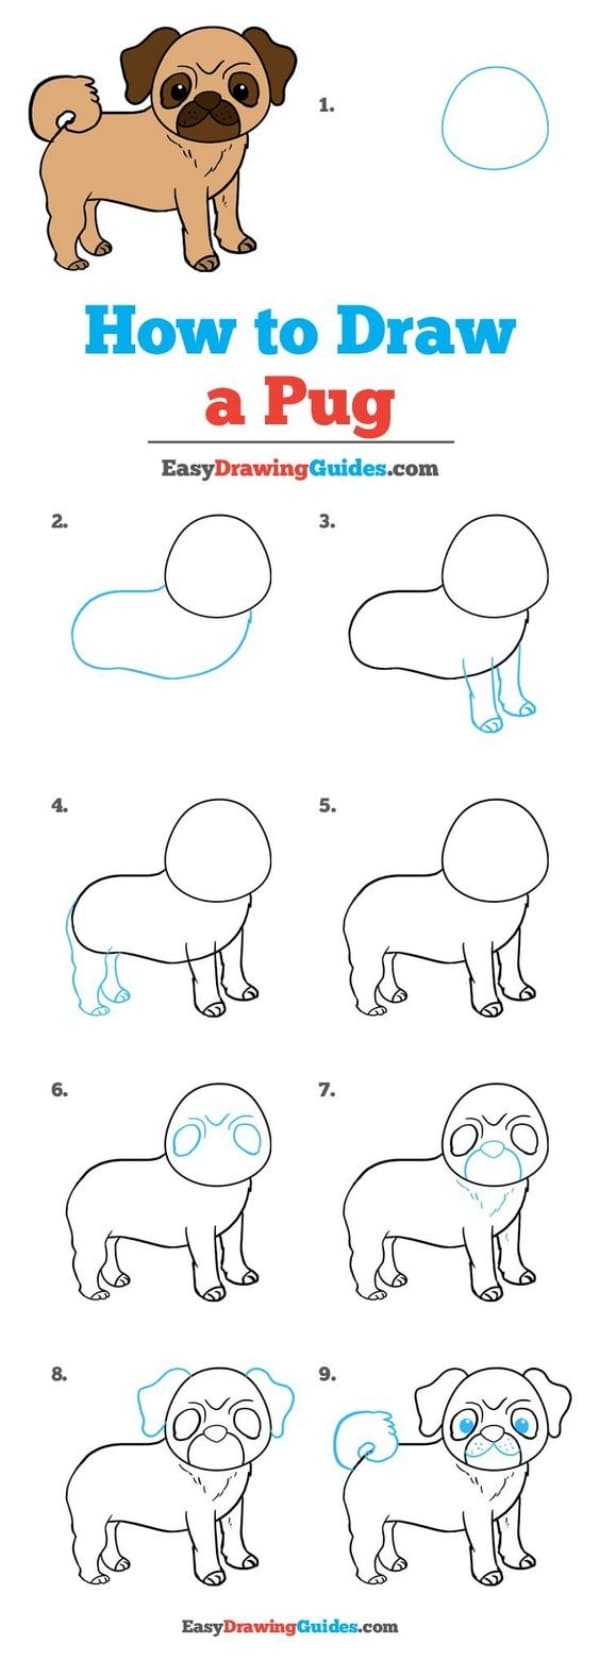 How To Draw A Cute Dog Step By Step Easy Learn How To Draw Cute Dog